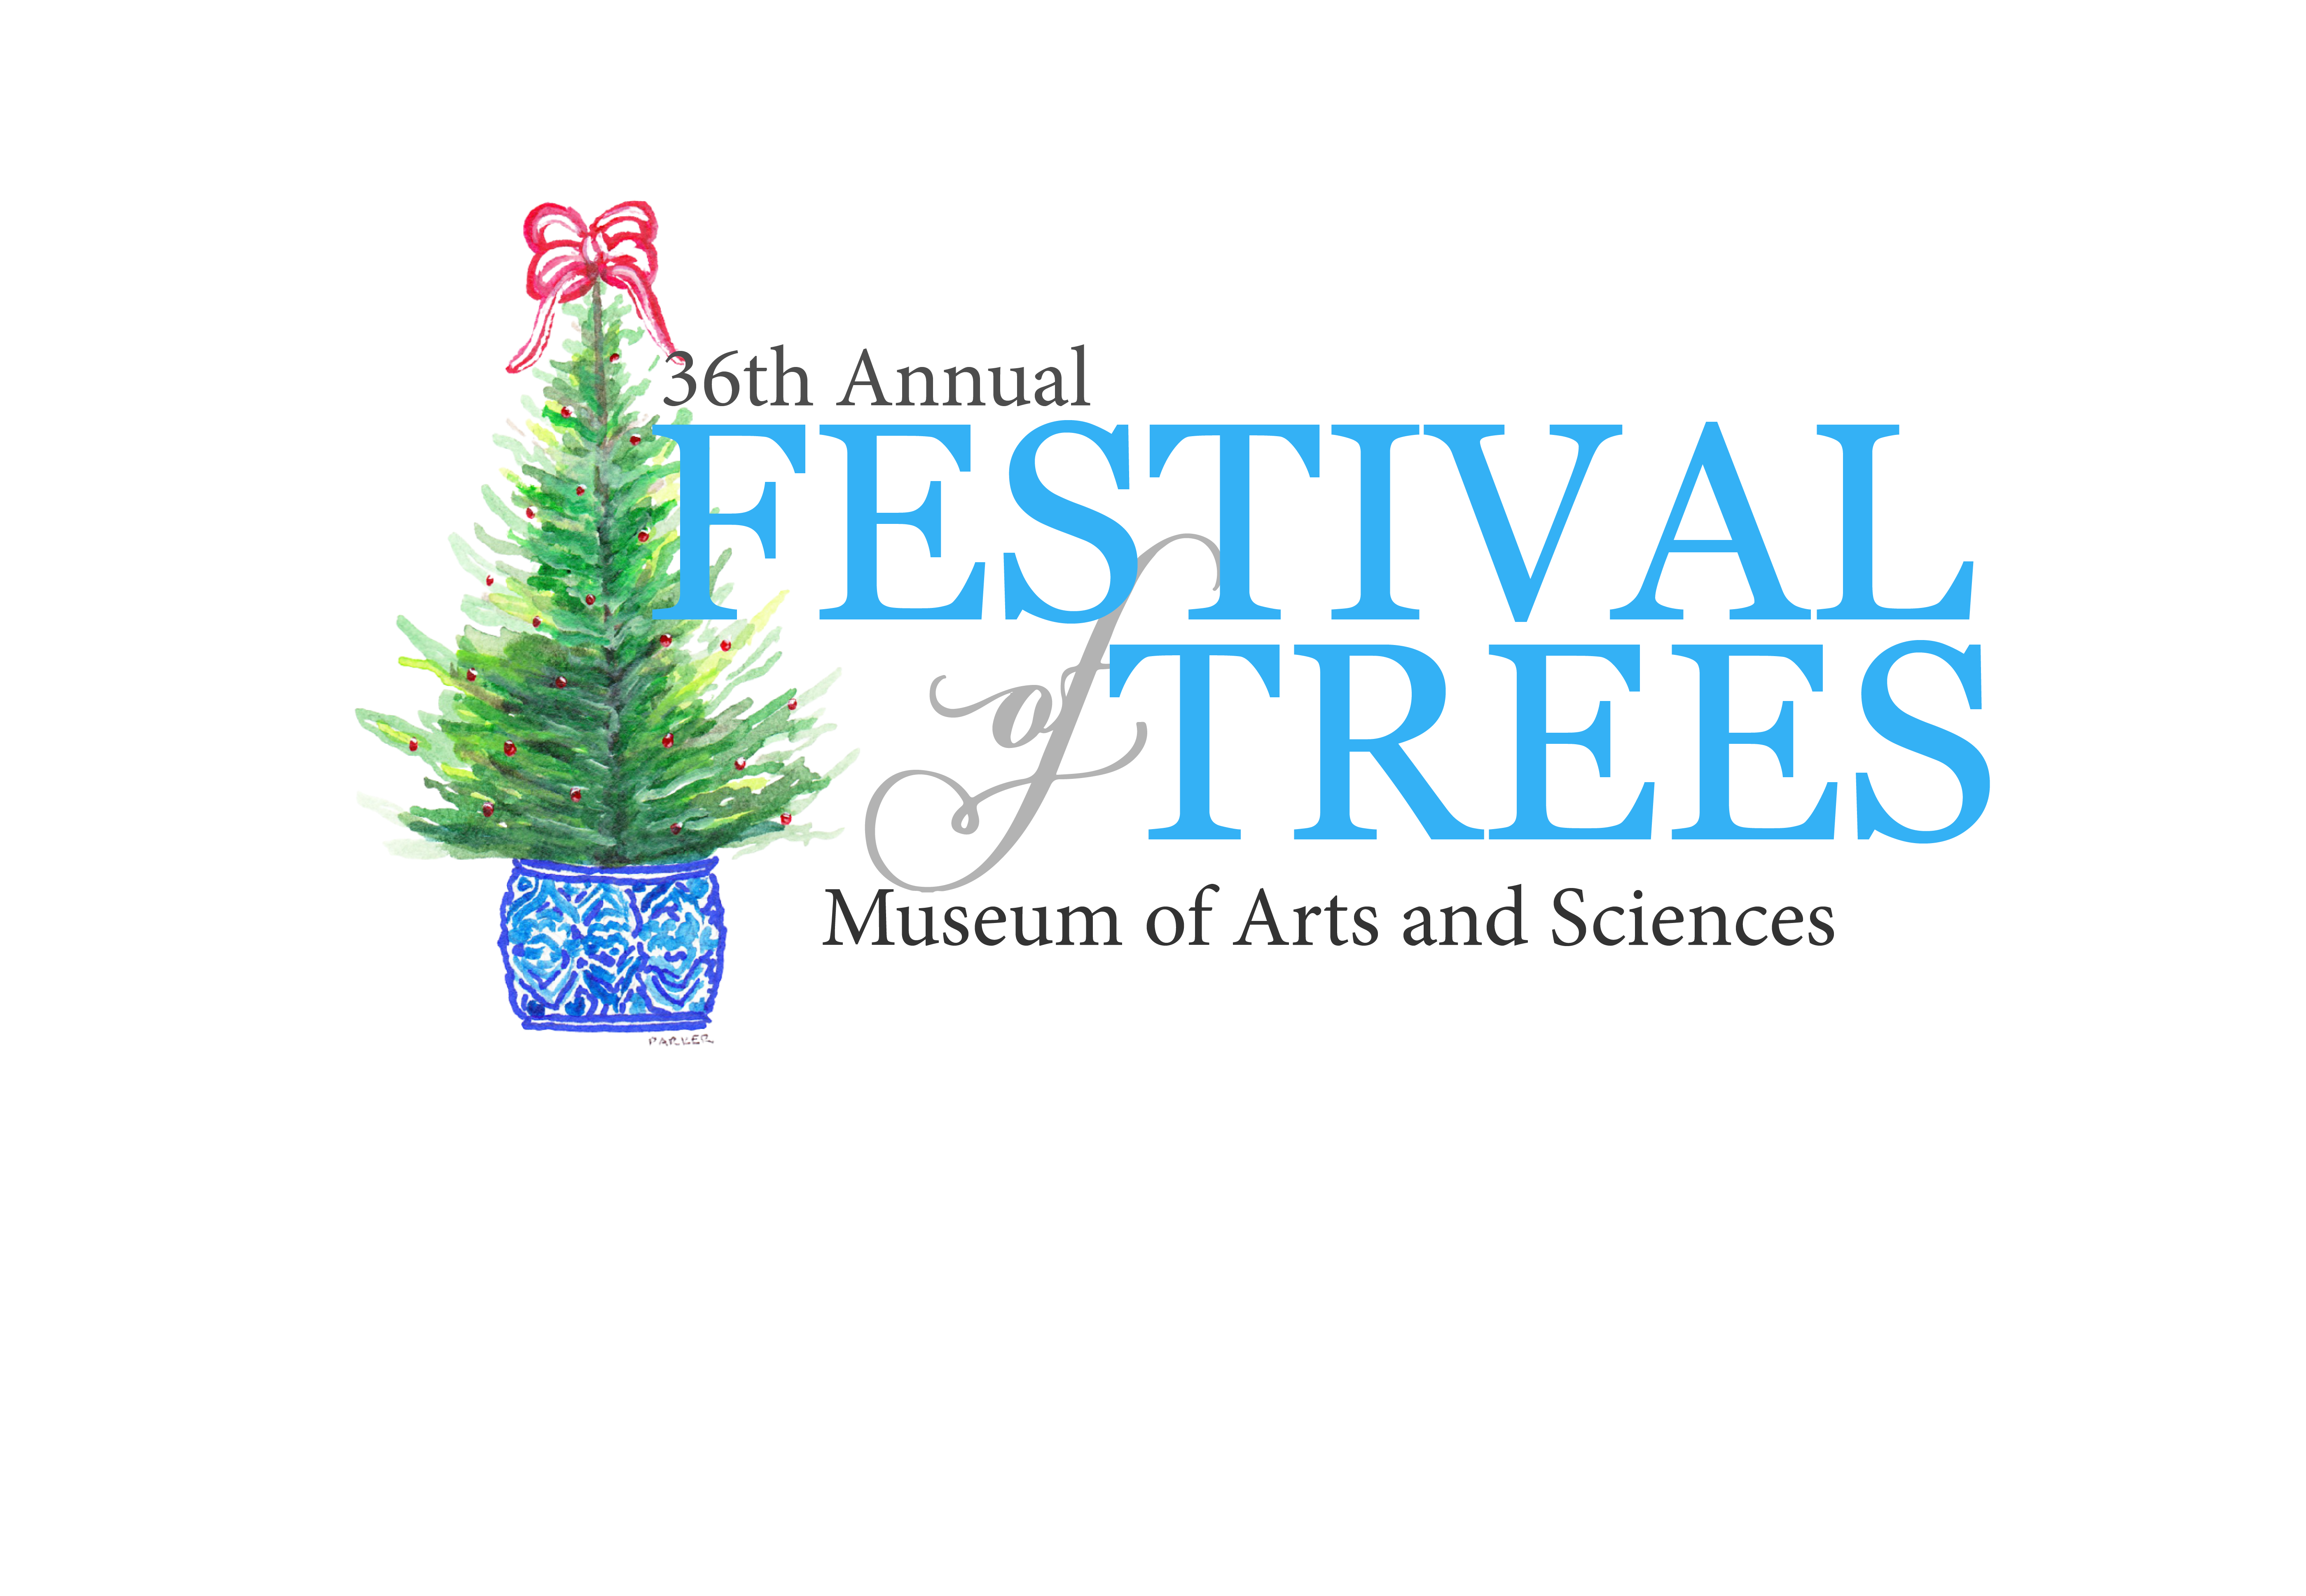 Festival of Trees Exhibition Contract & Proposal Museum of Arts and